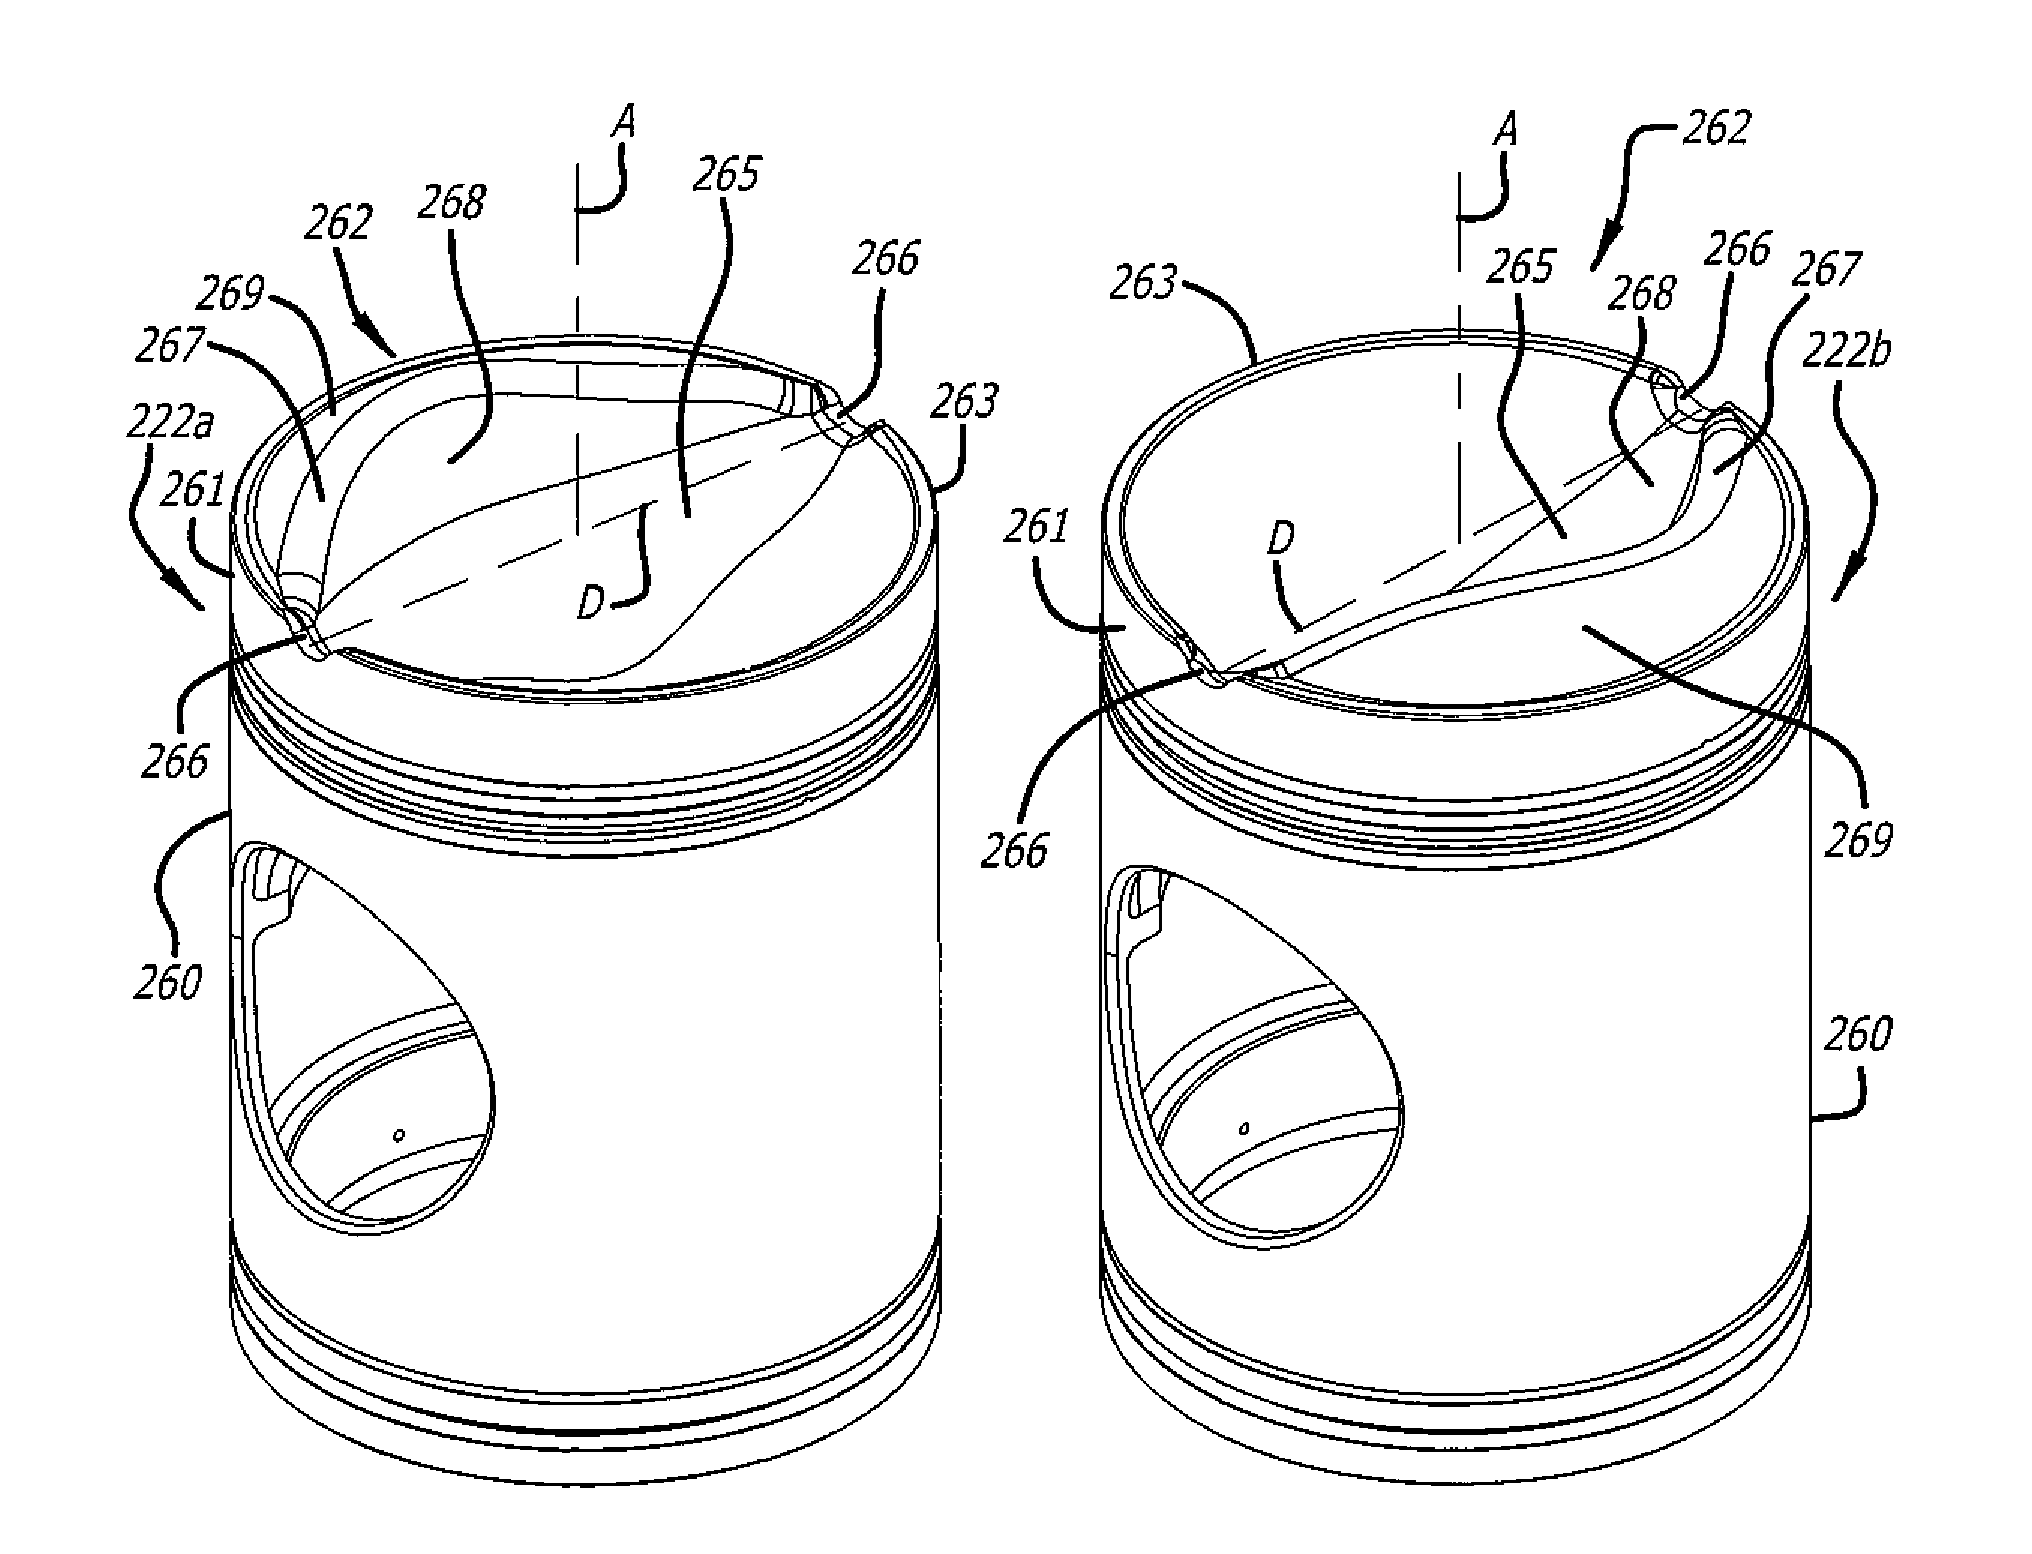 Asymmetrically-Shaped Combustion Chamber For Opposed-Piston Engines